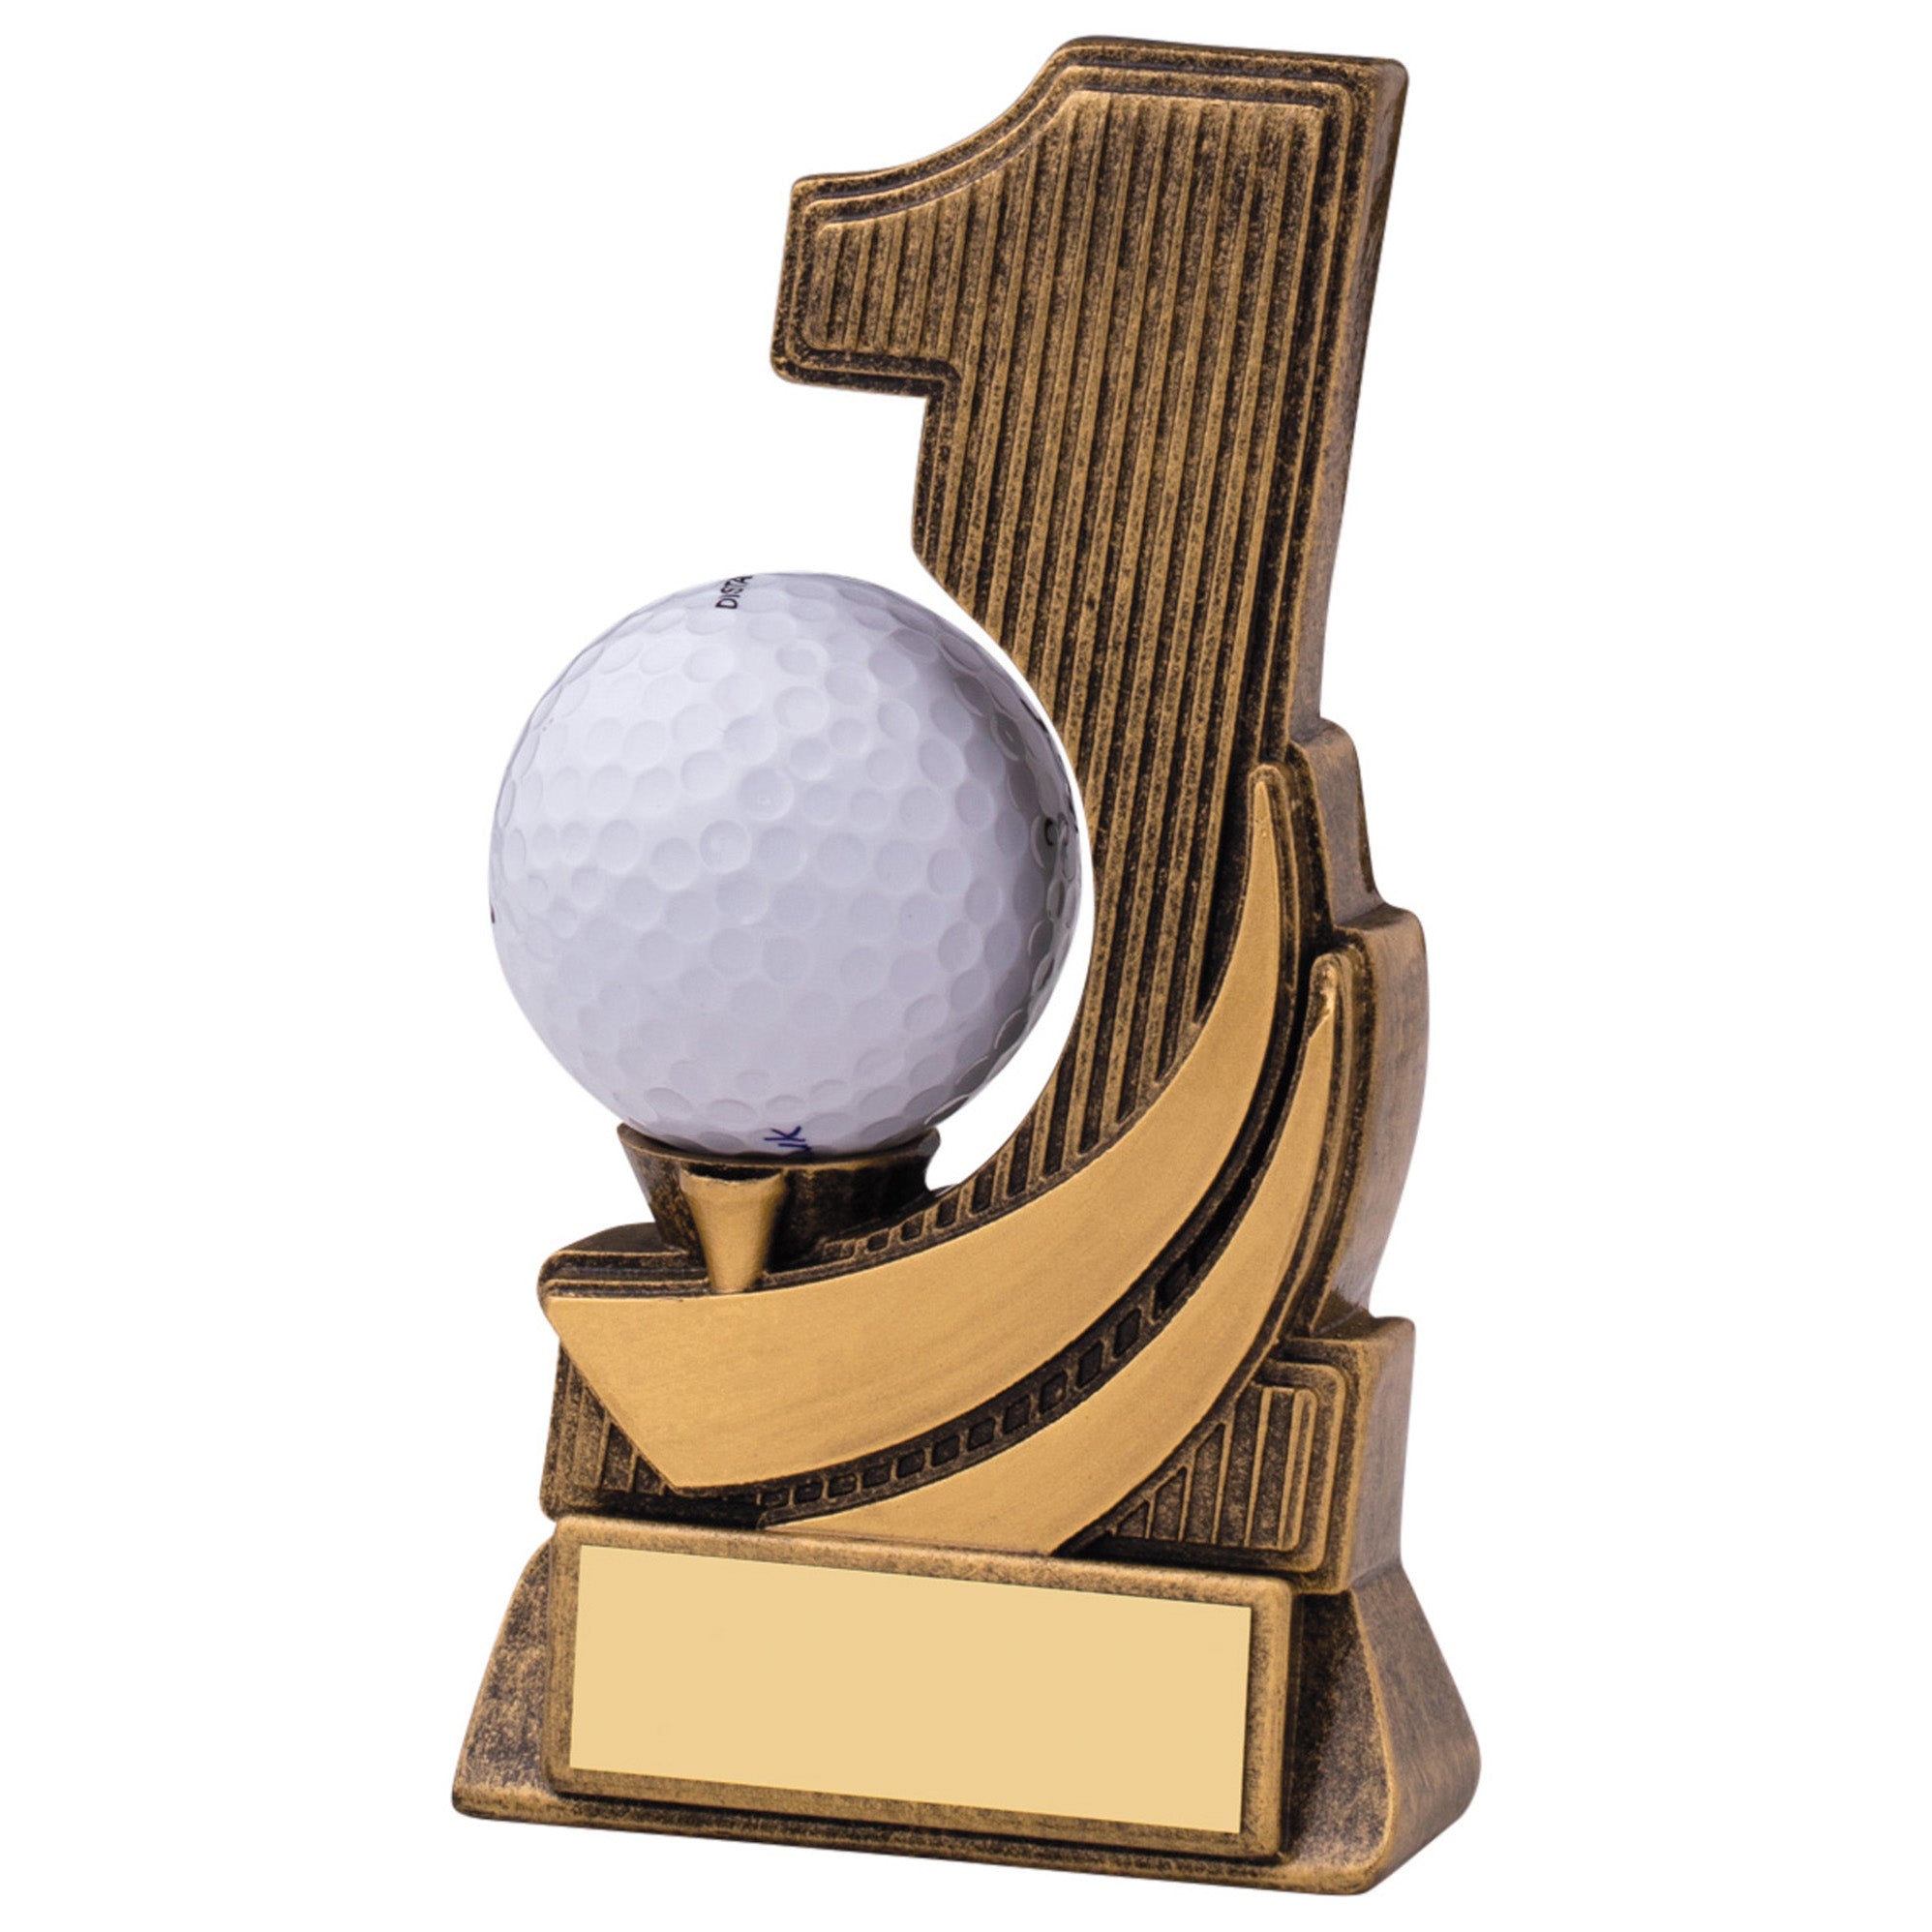 5" Personalised Golf Hole In One Resin Award (Ball Not Included)